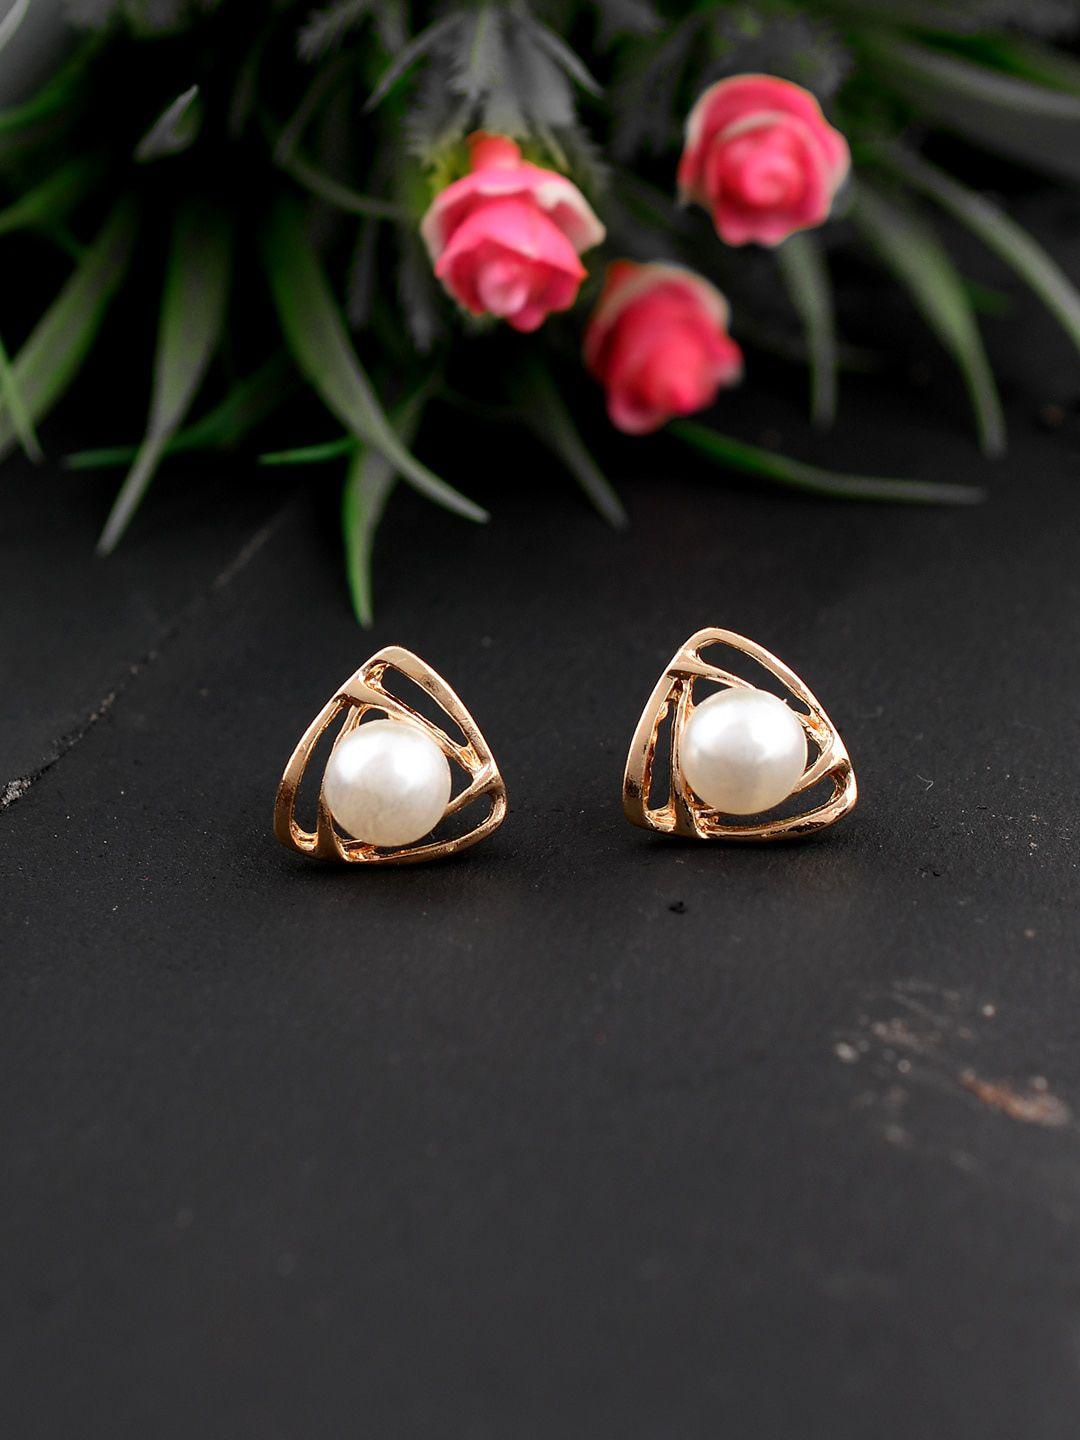 silvermerc designs rose gold-plated contemporary studs earrings